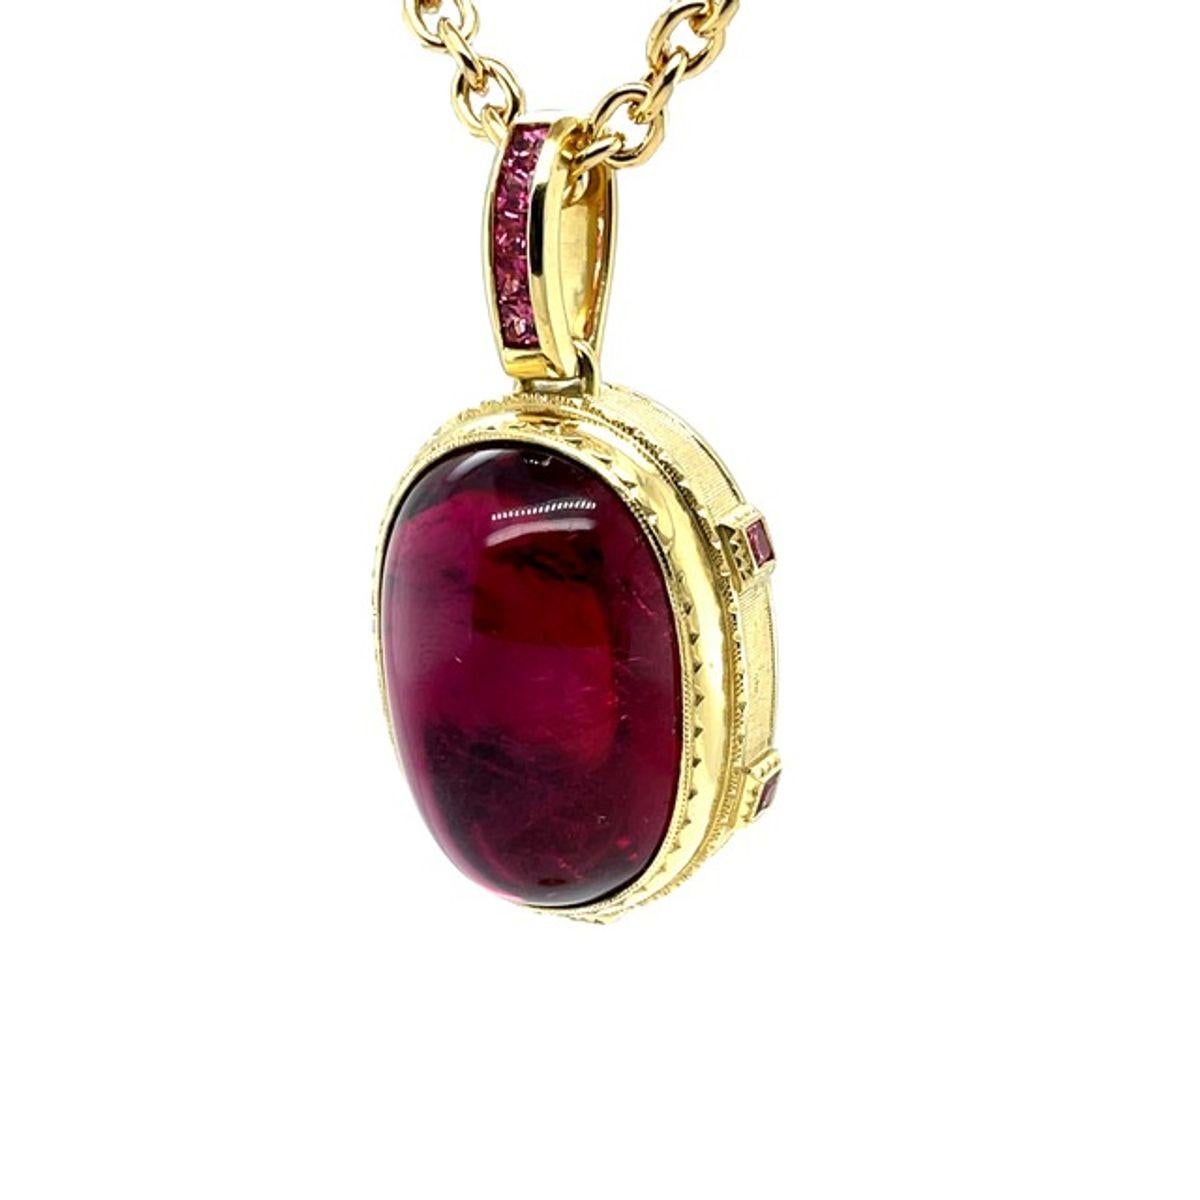 This giant rubellite tourmaline and spinel pendant features a spectacular 81.58 carat rubellite cabochon! The oval rubellite is a beautifully proportioned, crystalline gem that displays vibrant reddish pink and purplish pink color, depending on the